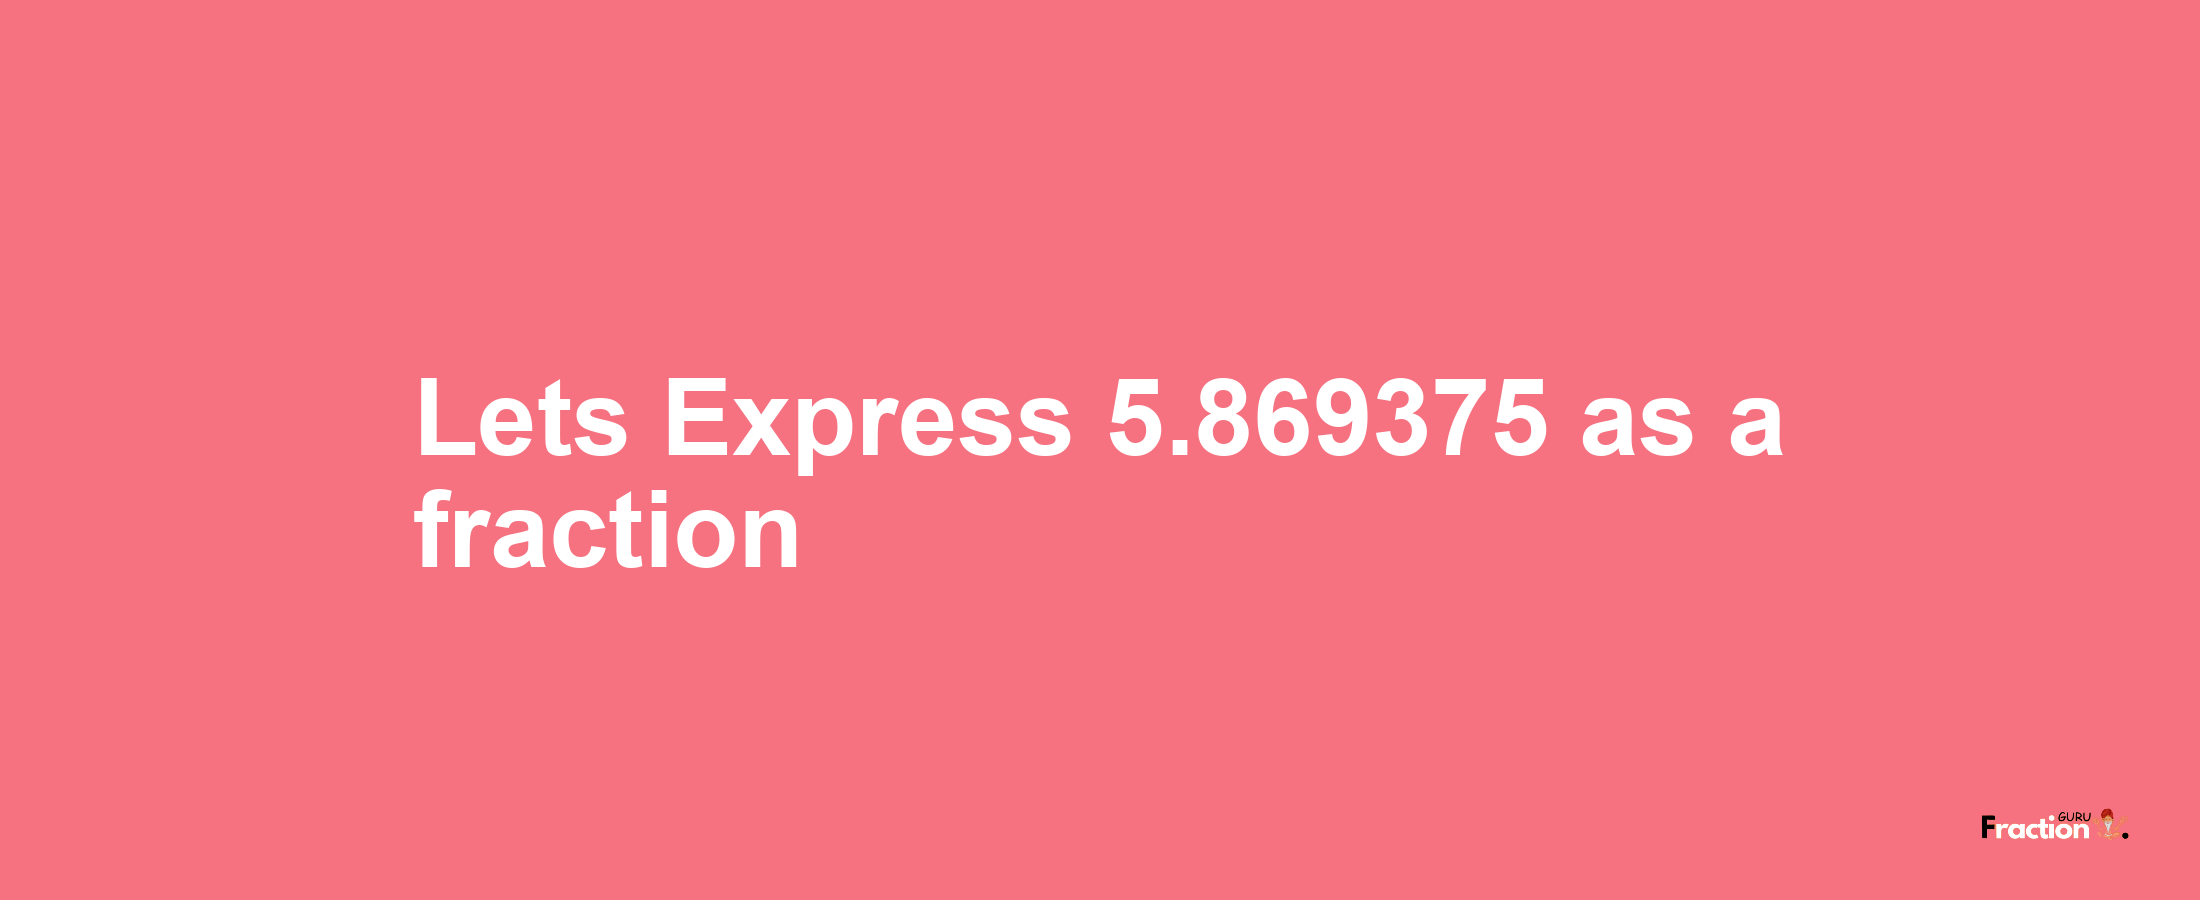 Lets Express 5.869375 as afraction